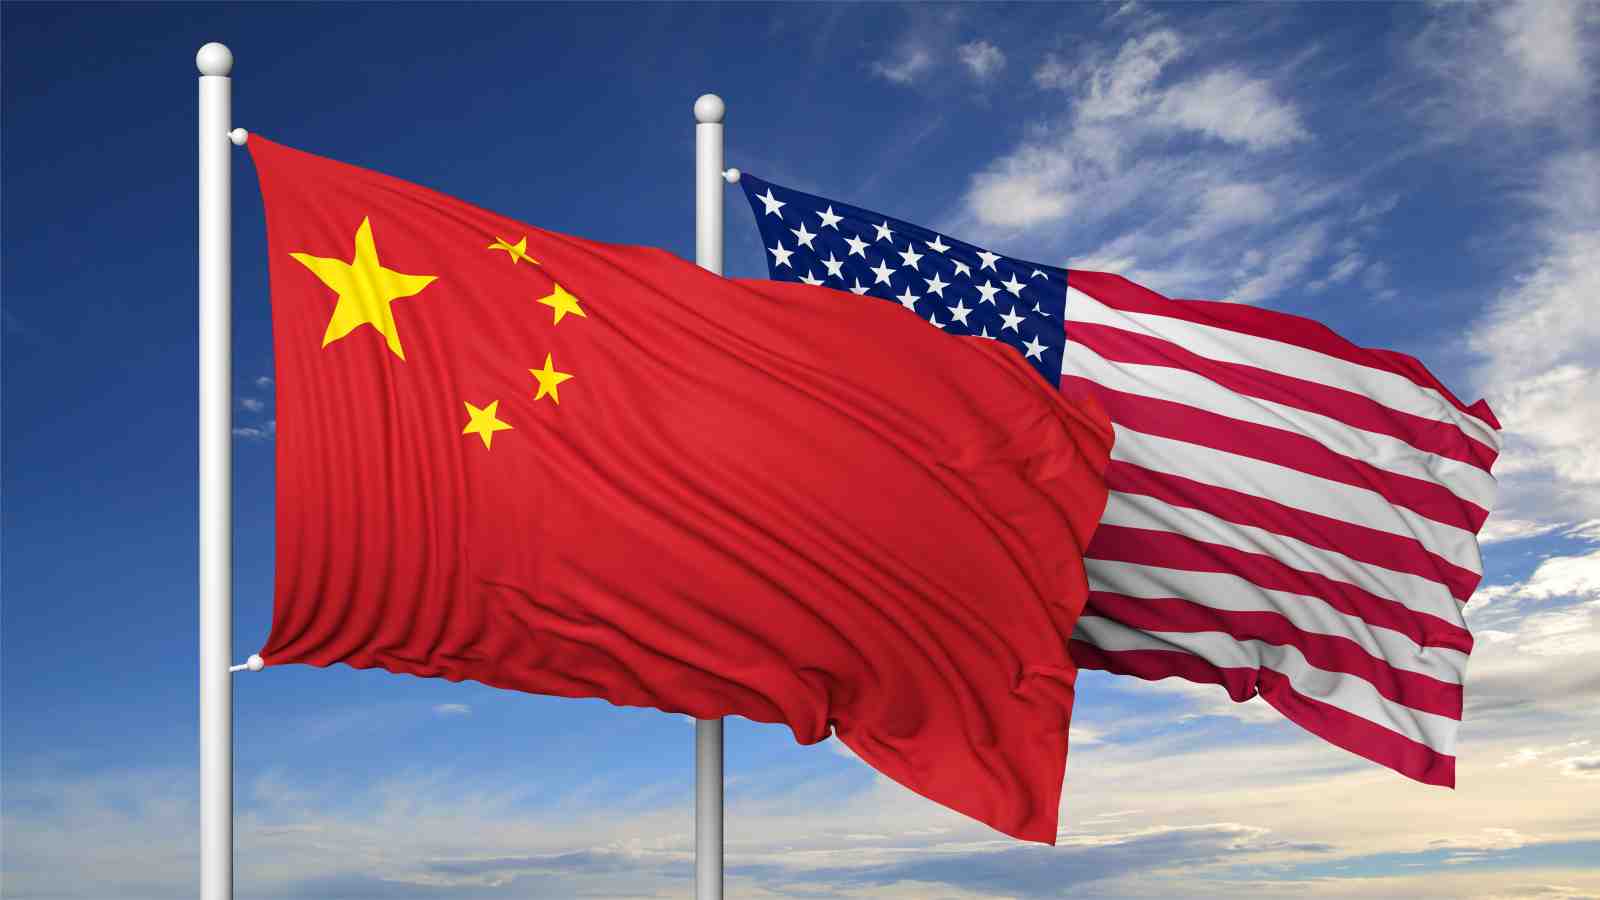 The Chinese and United States flag